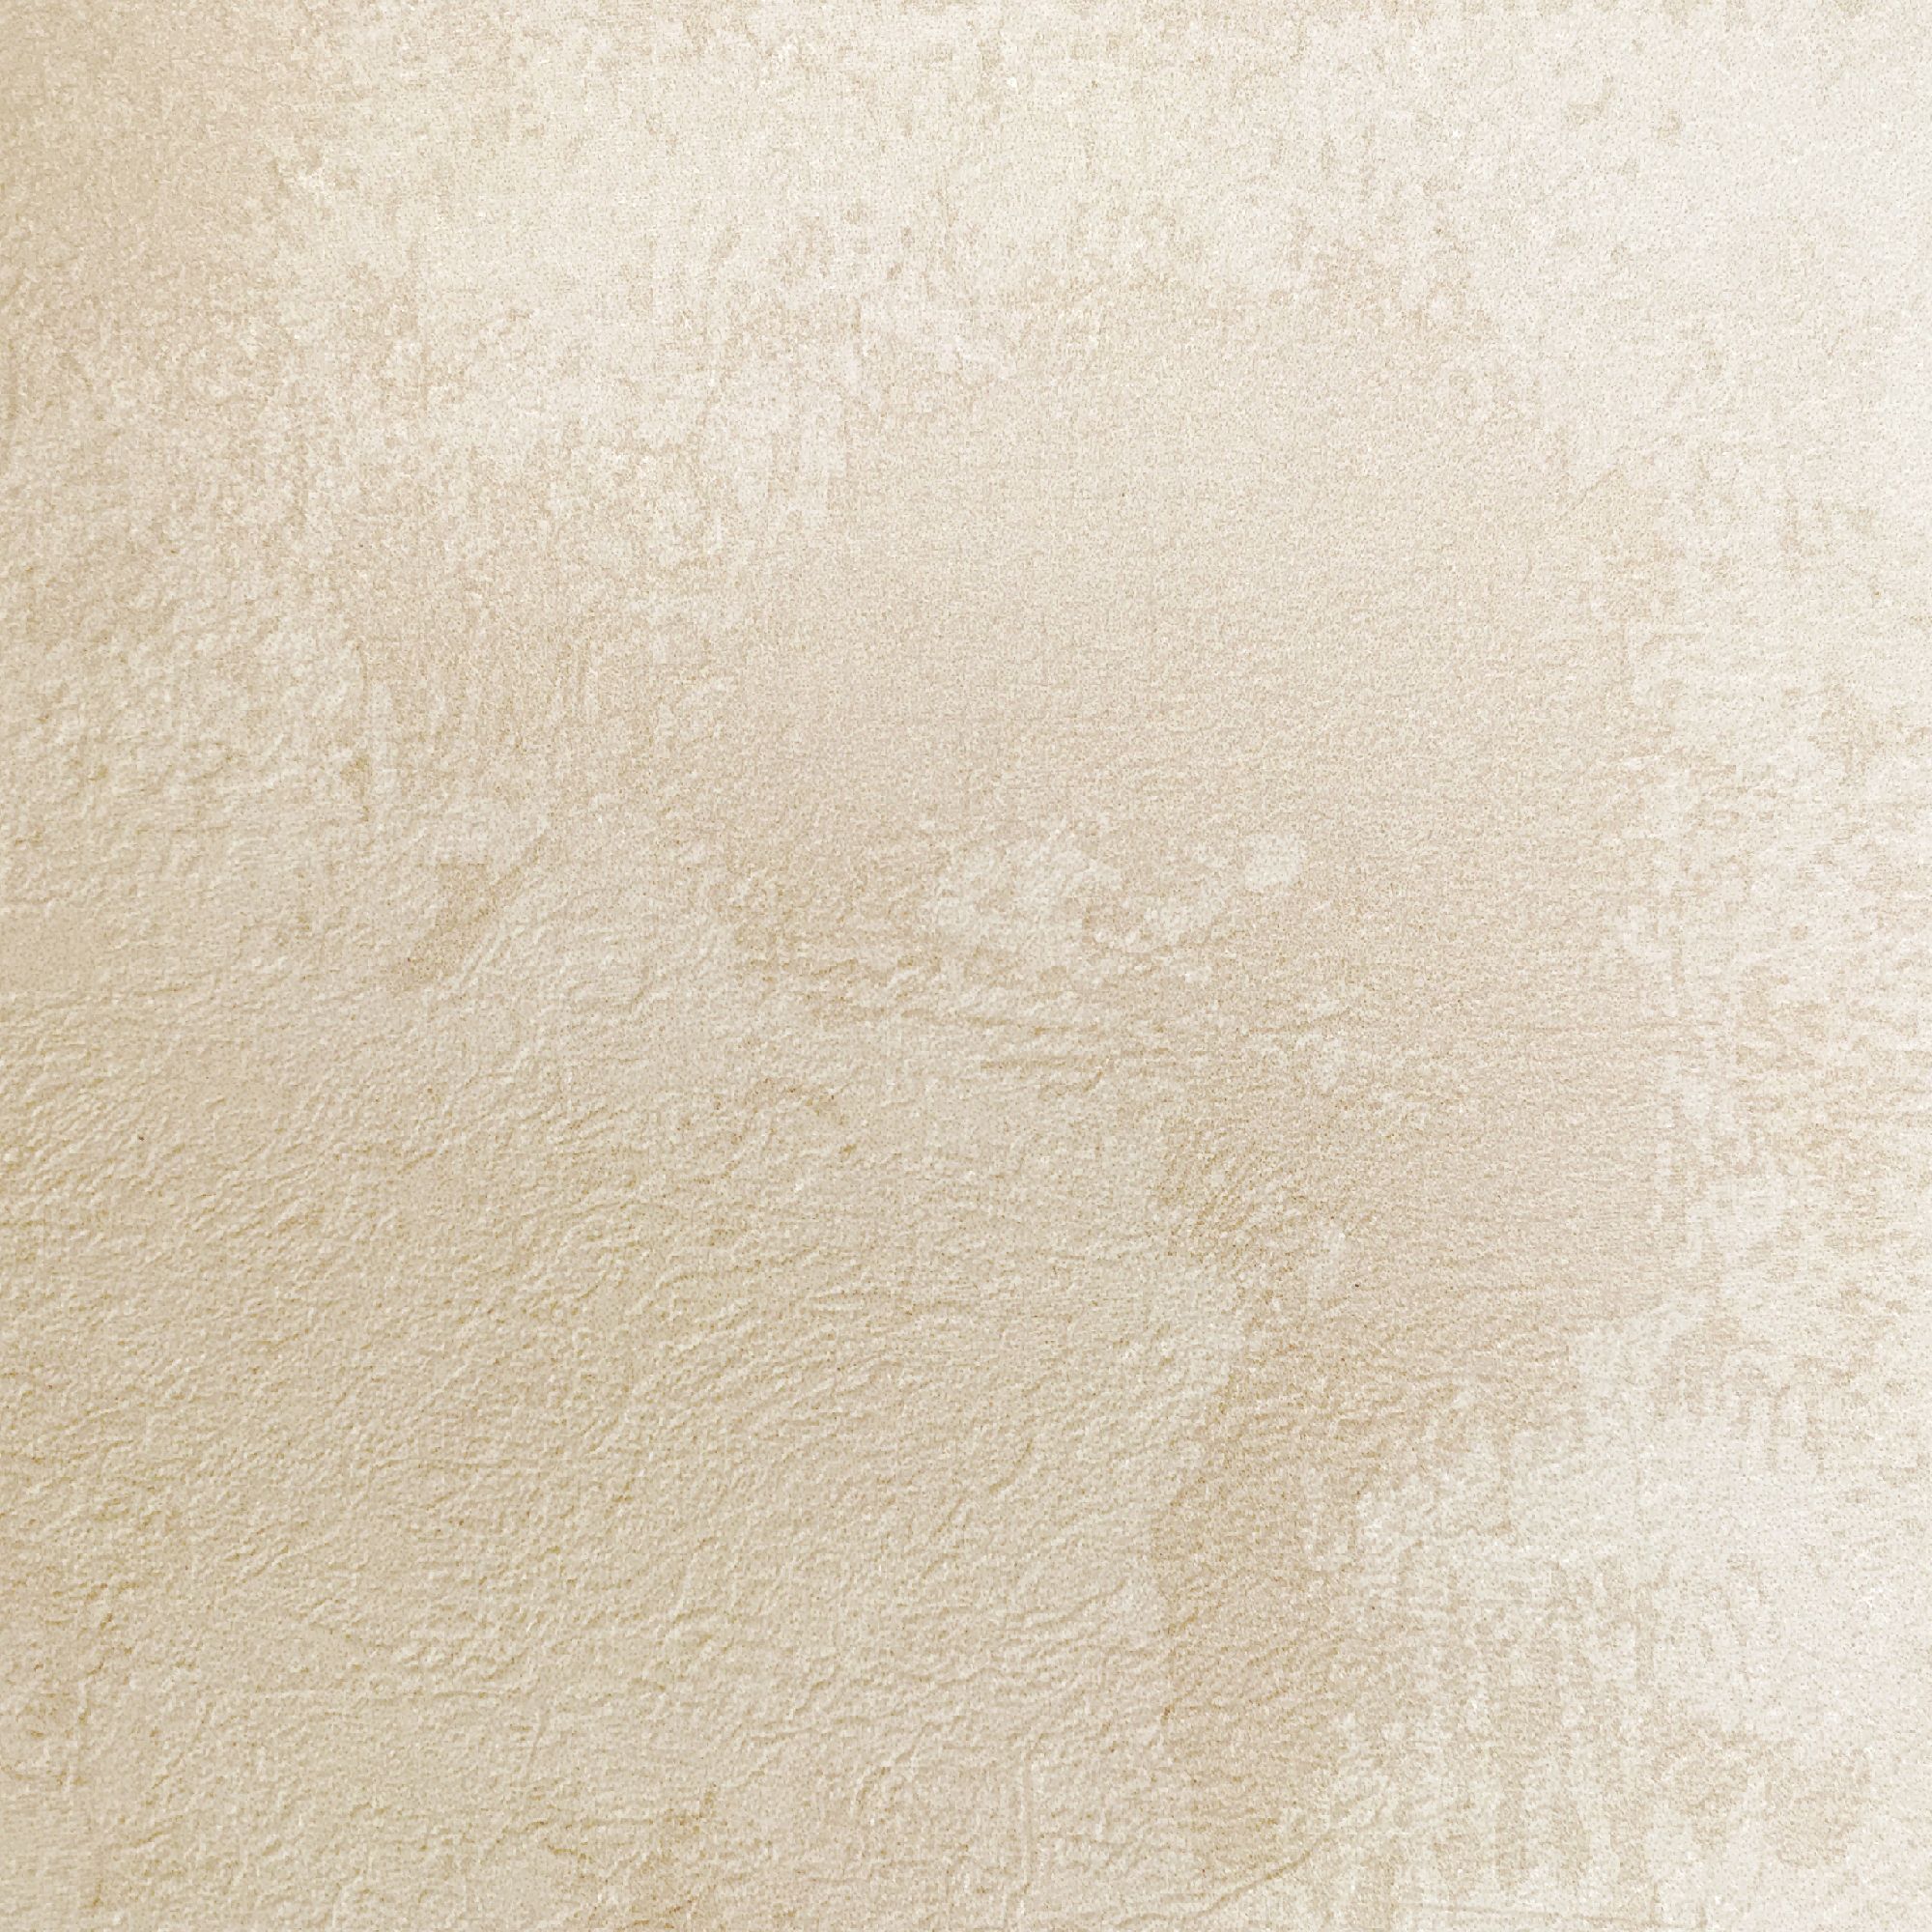 GoodHome Omey Beige Distressed effect Textured Wallpaper Sample